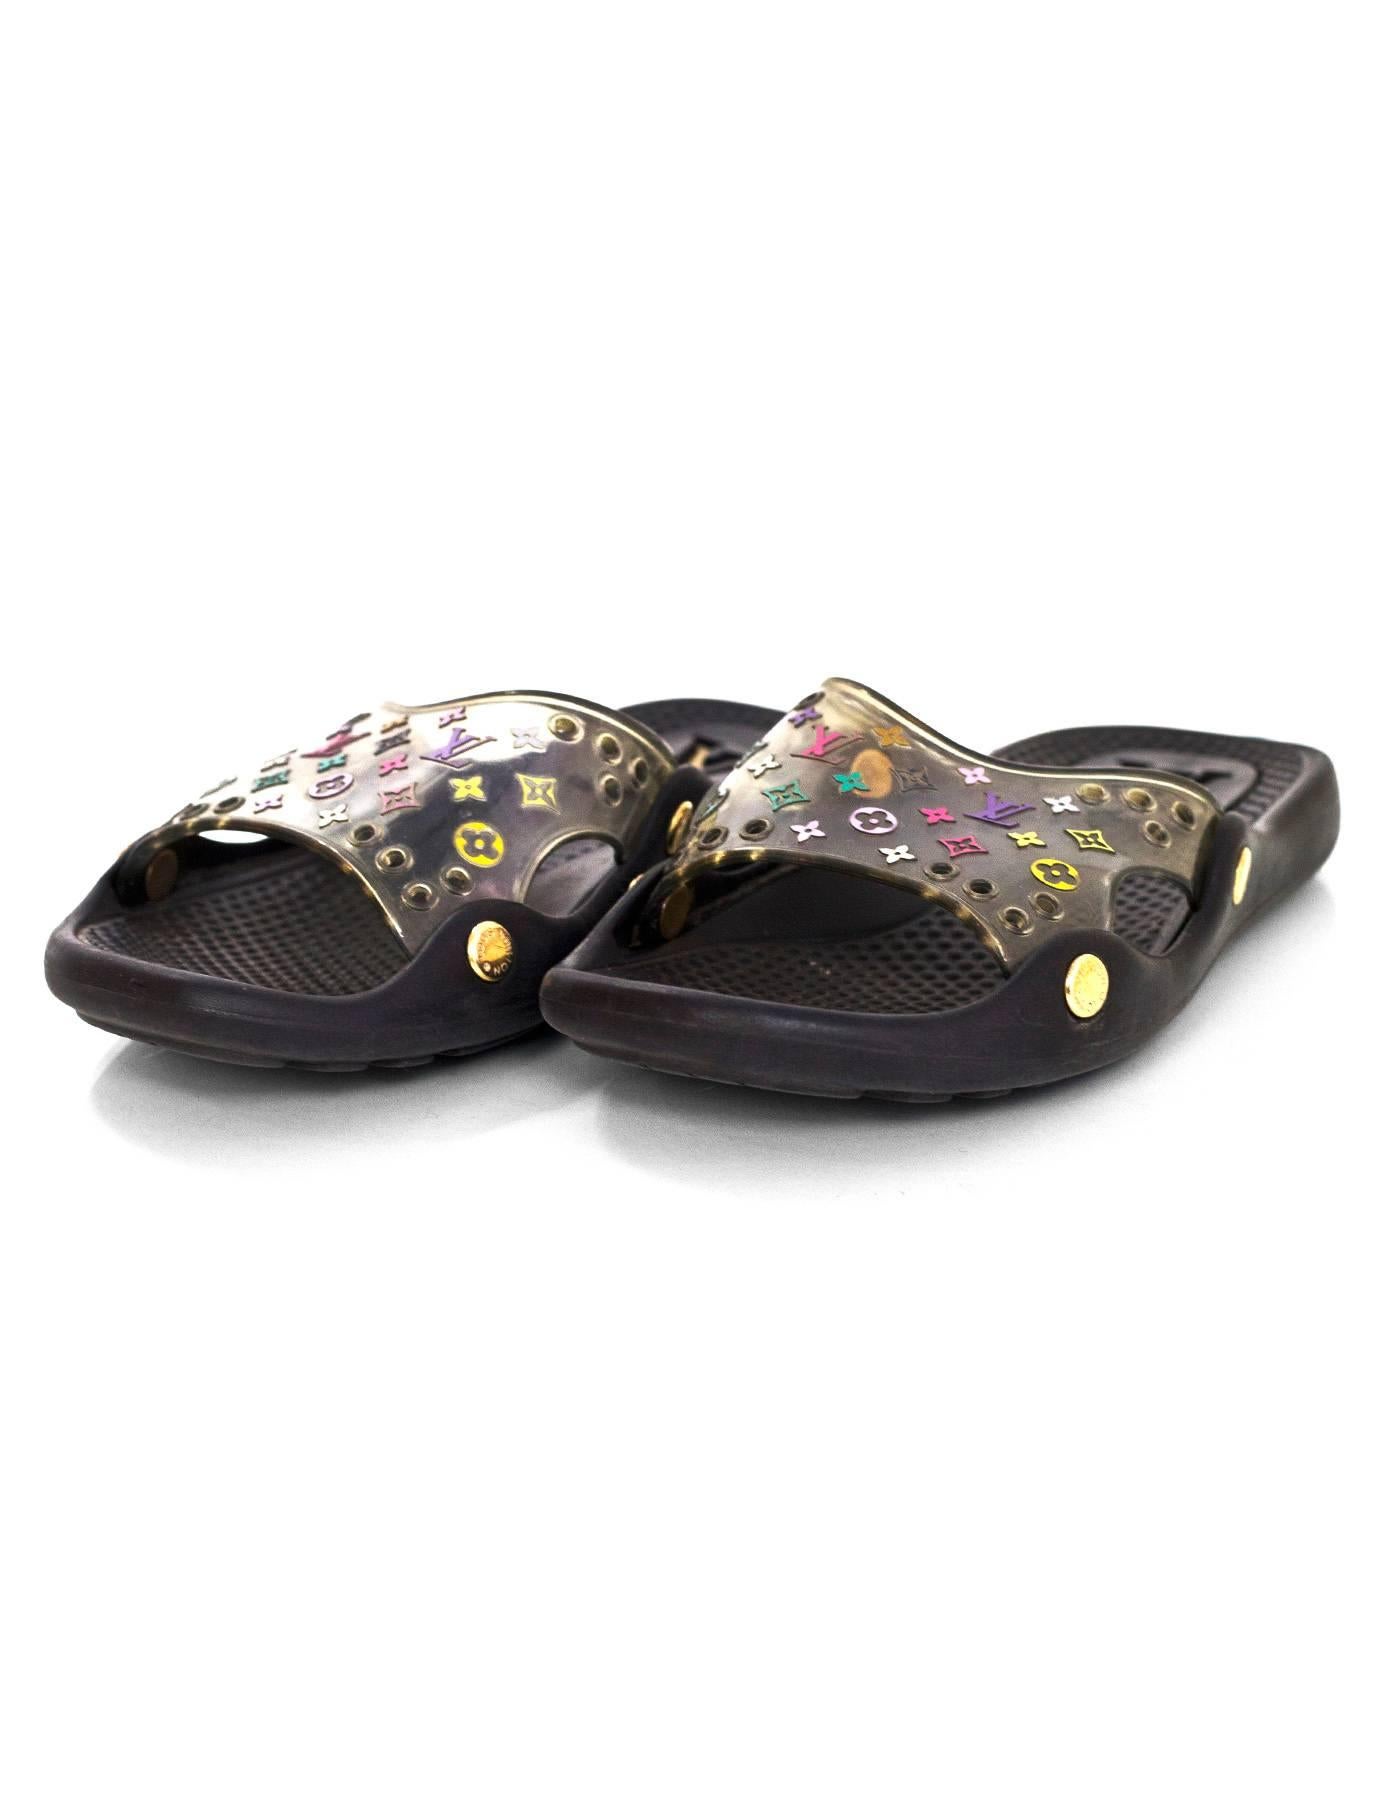 Louis Vuitton Black & Multi-Colored Monogram Slide Sandals 

Made In: Italy
Color: Black and multi-colored
Materials: Plastic
Closure/Opening: Slide on
Sole Stamp: LV Made in Italy 35
Overall Condition: Very good pre-owned condition with the